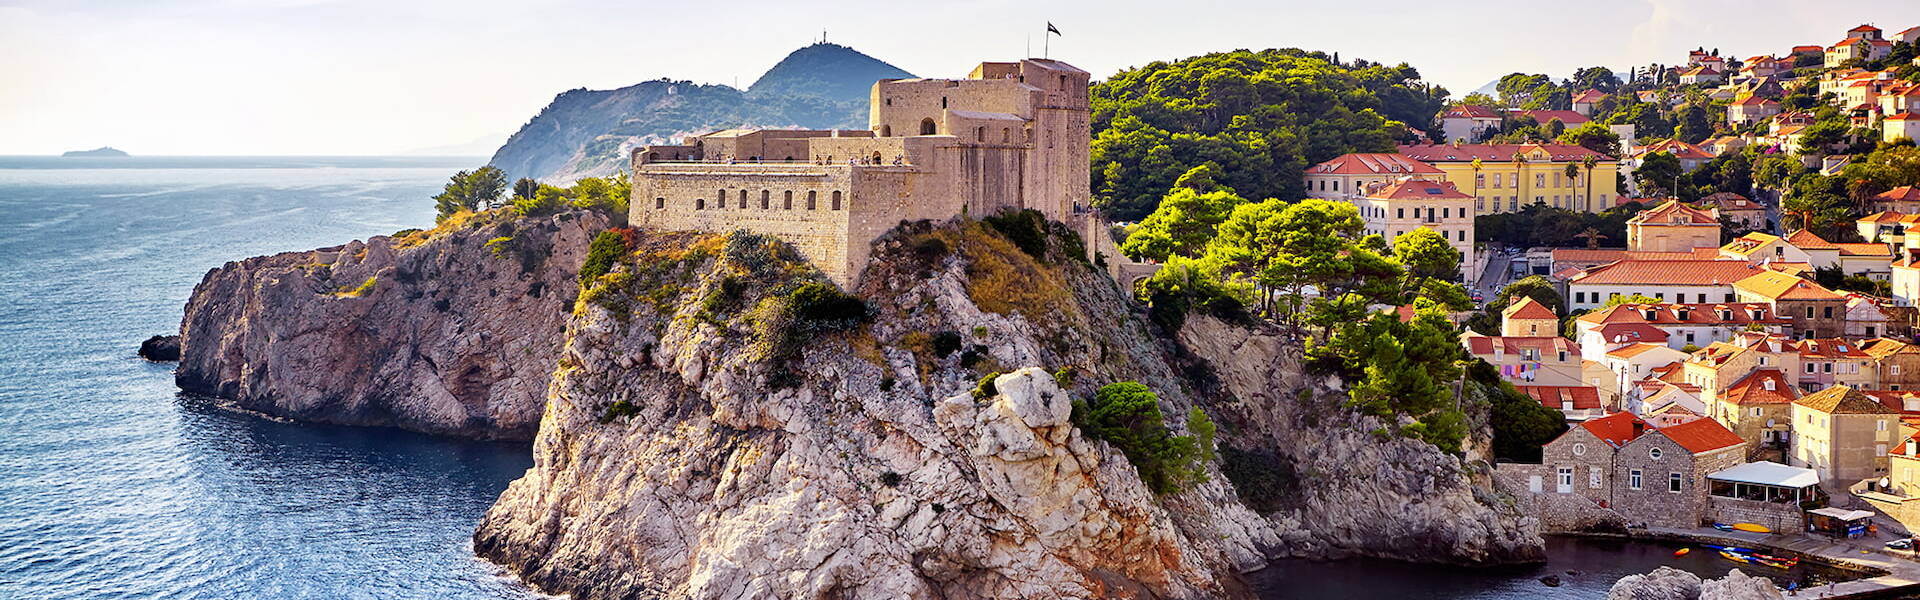 Dubrovnik, one of the world’s best-preserved medieval towns, view of a building built into the coast